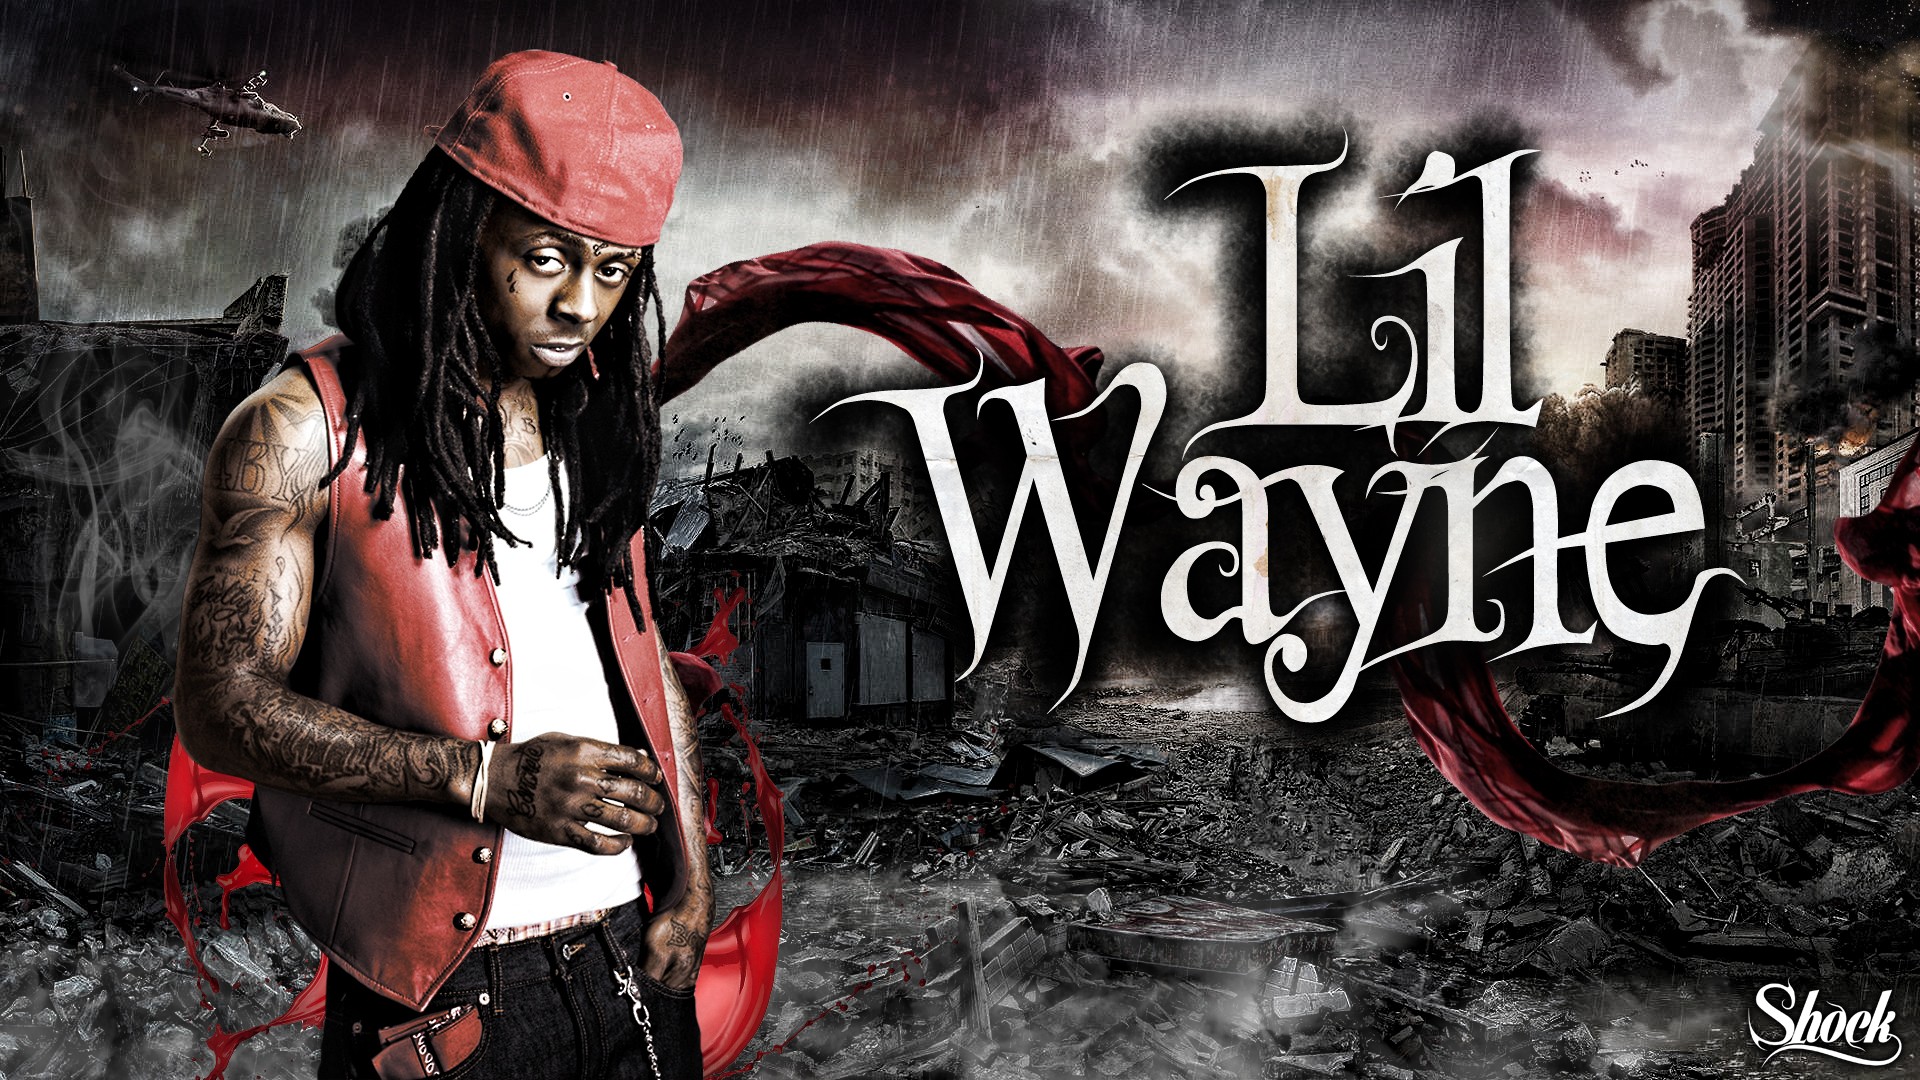 Lil Wayne Wallpapers High Resolution and Quality Download